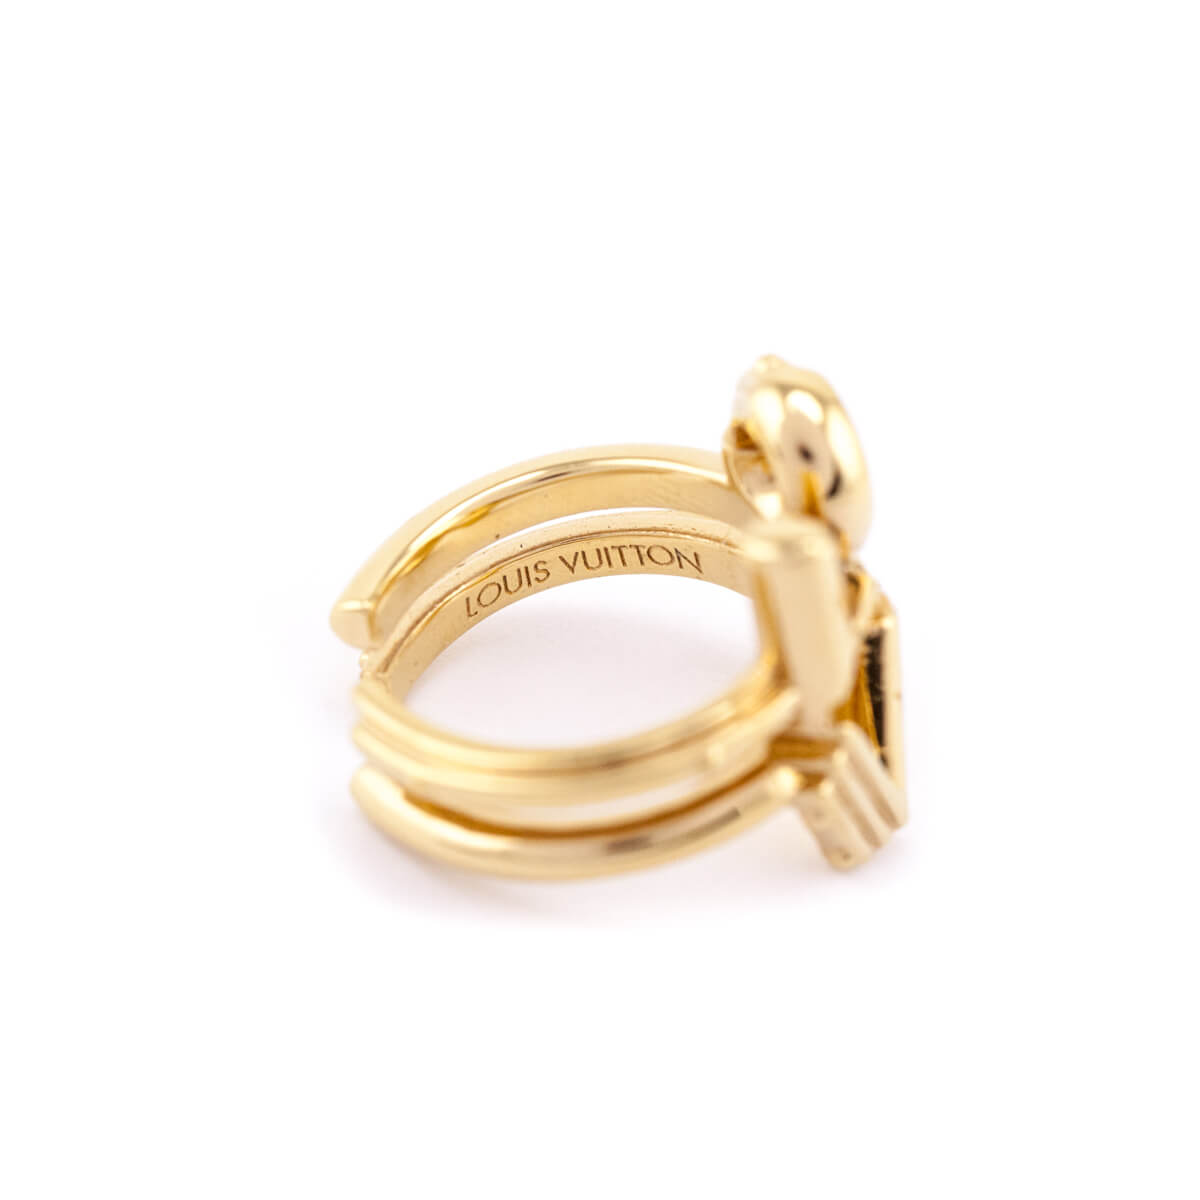 Louis Vuitton - Authenticated Ring - Yellow Gold Gold For Woman, Very Good condition